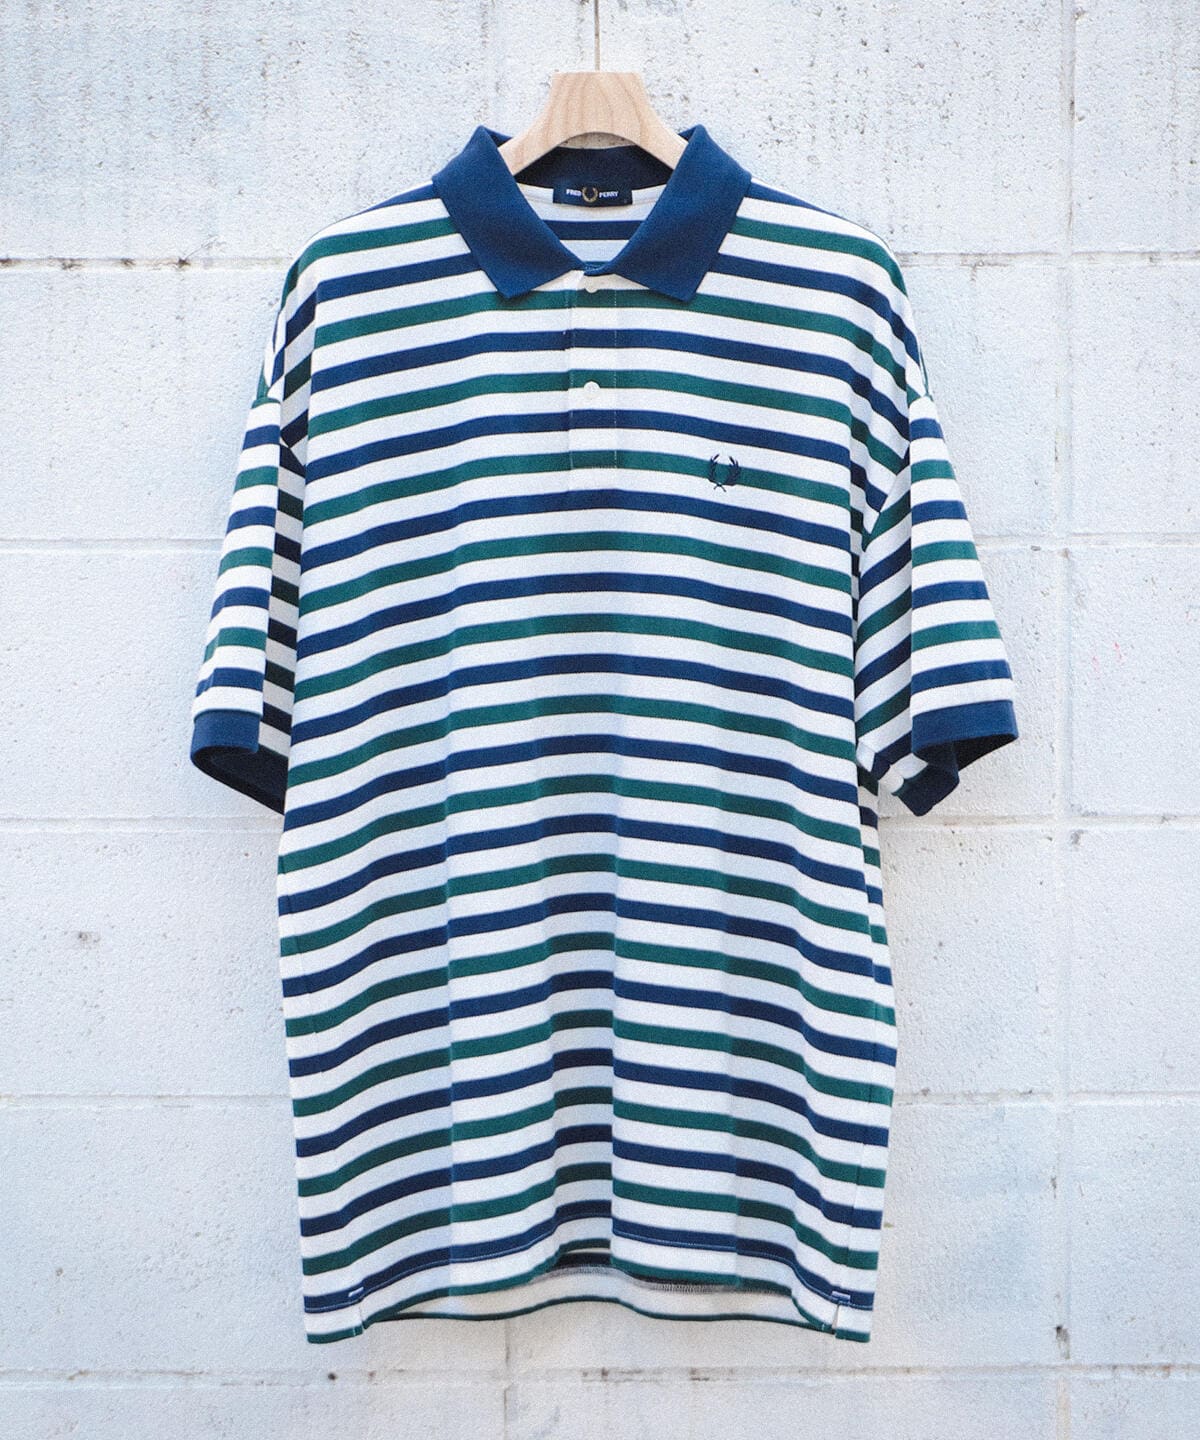 ☆【FRED PERRY】フレッドペリー ポロシャツ ボーダー